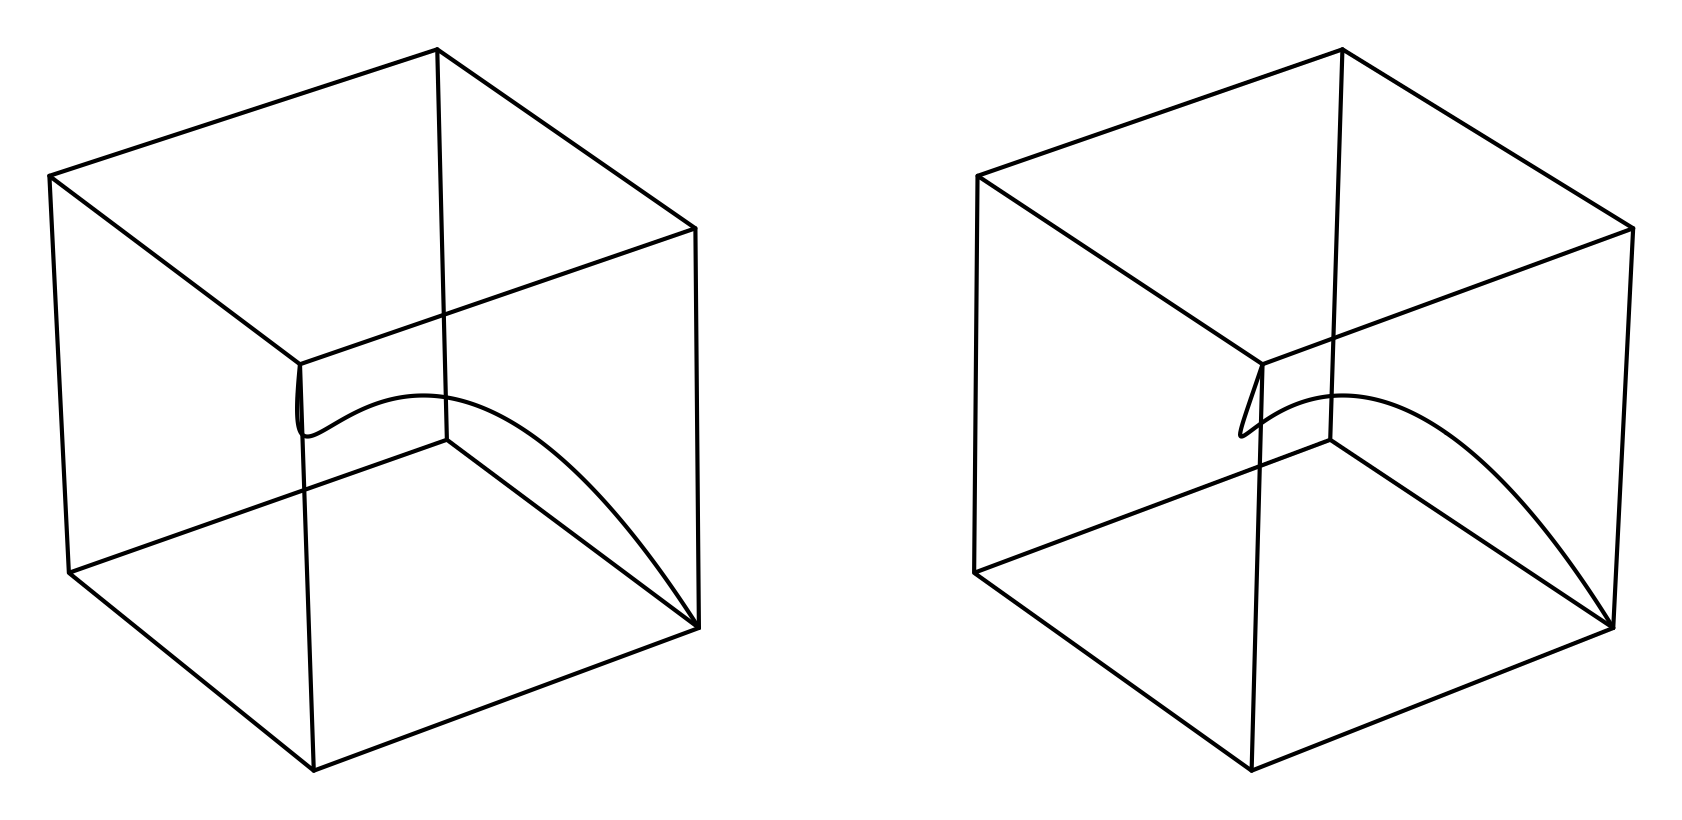 a stereo pair
  allowing a three-dimensional view of the twisted cubic